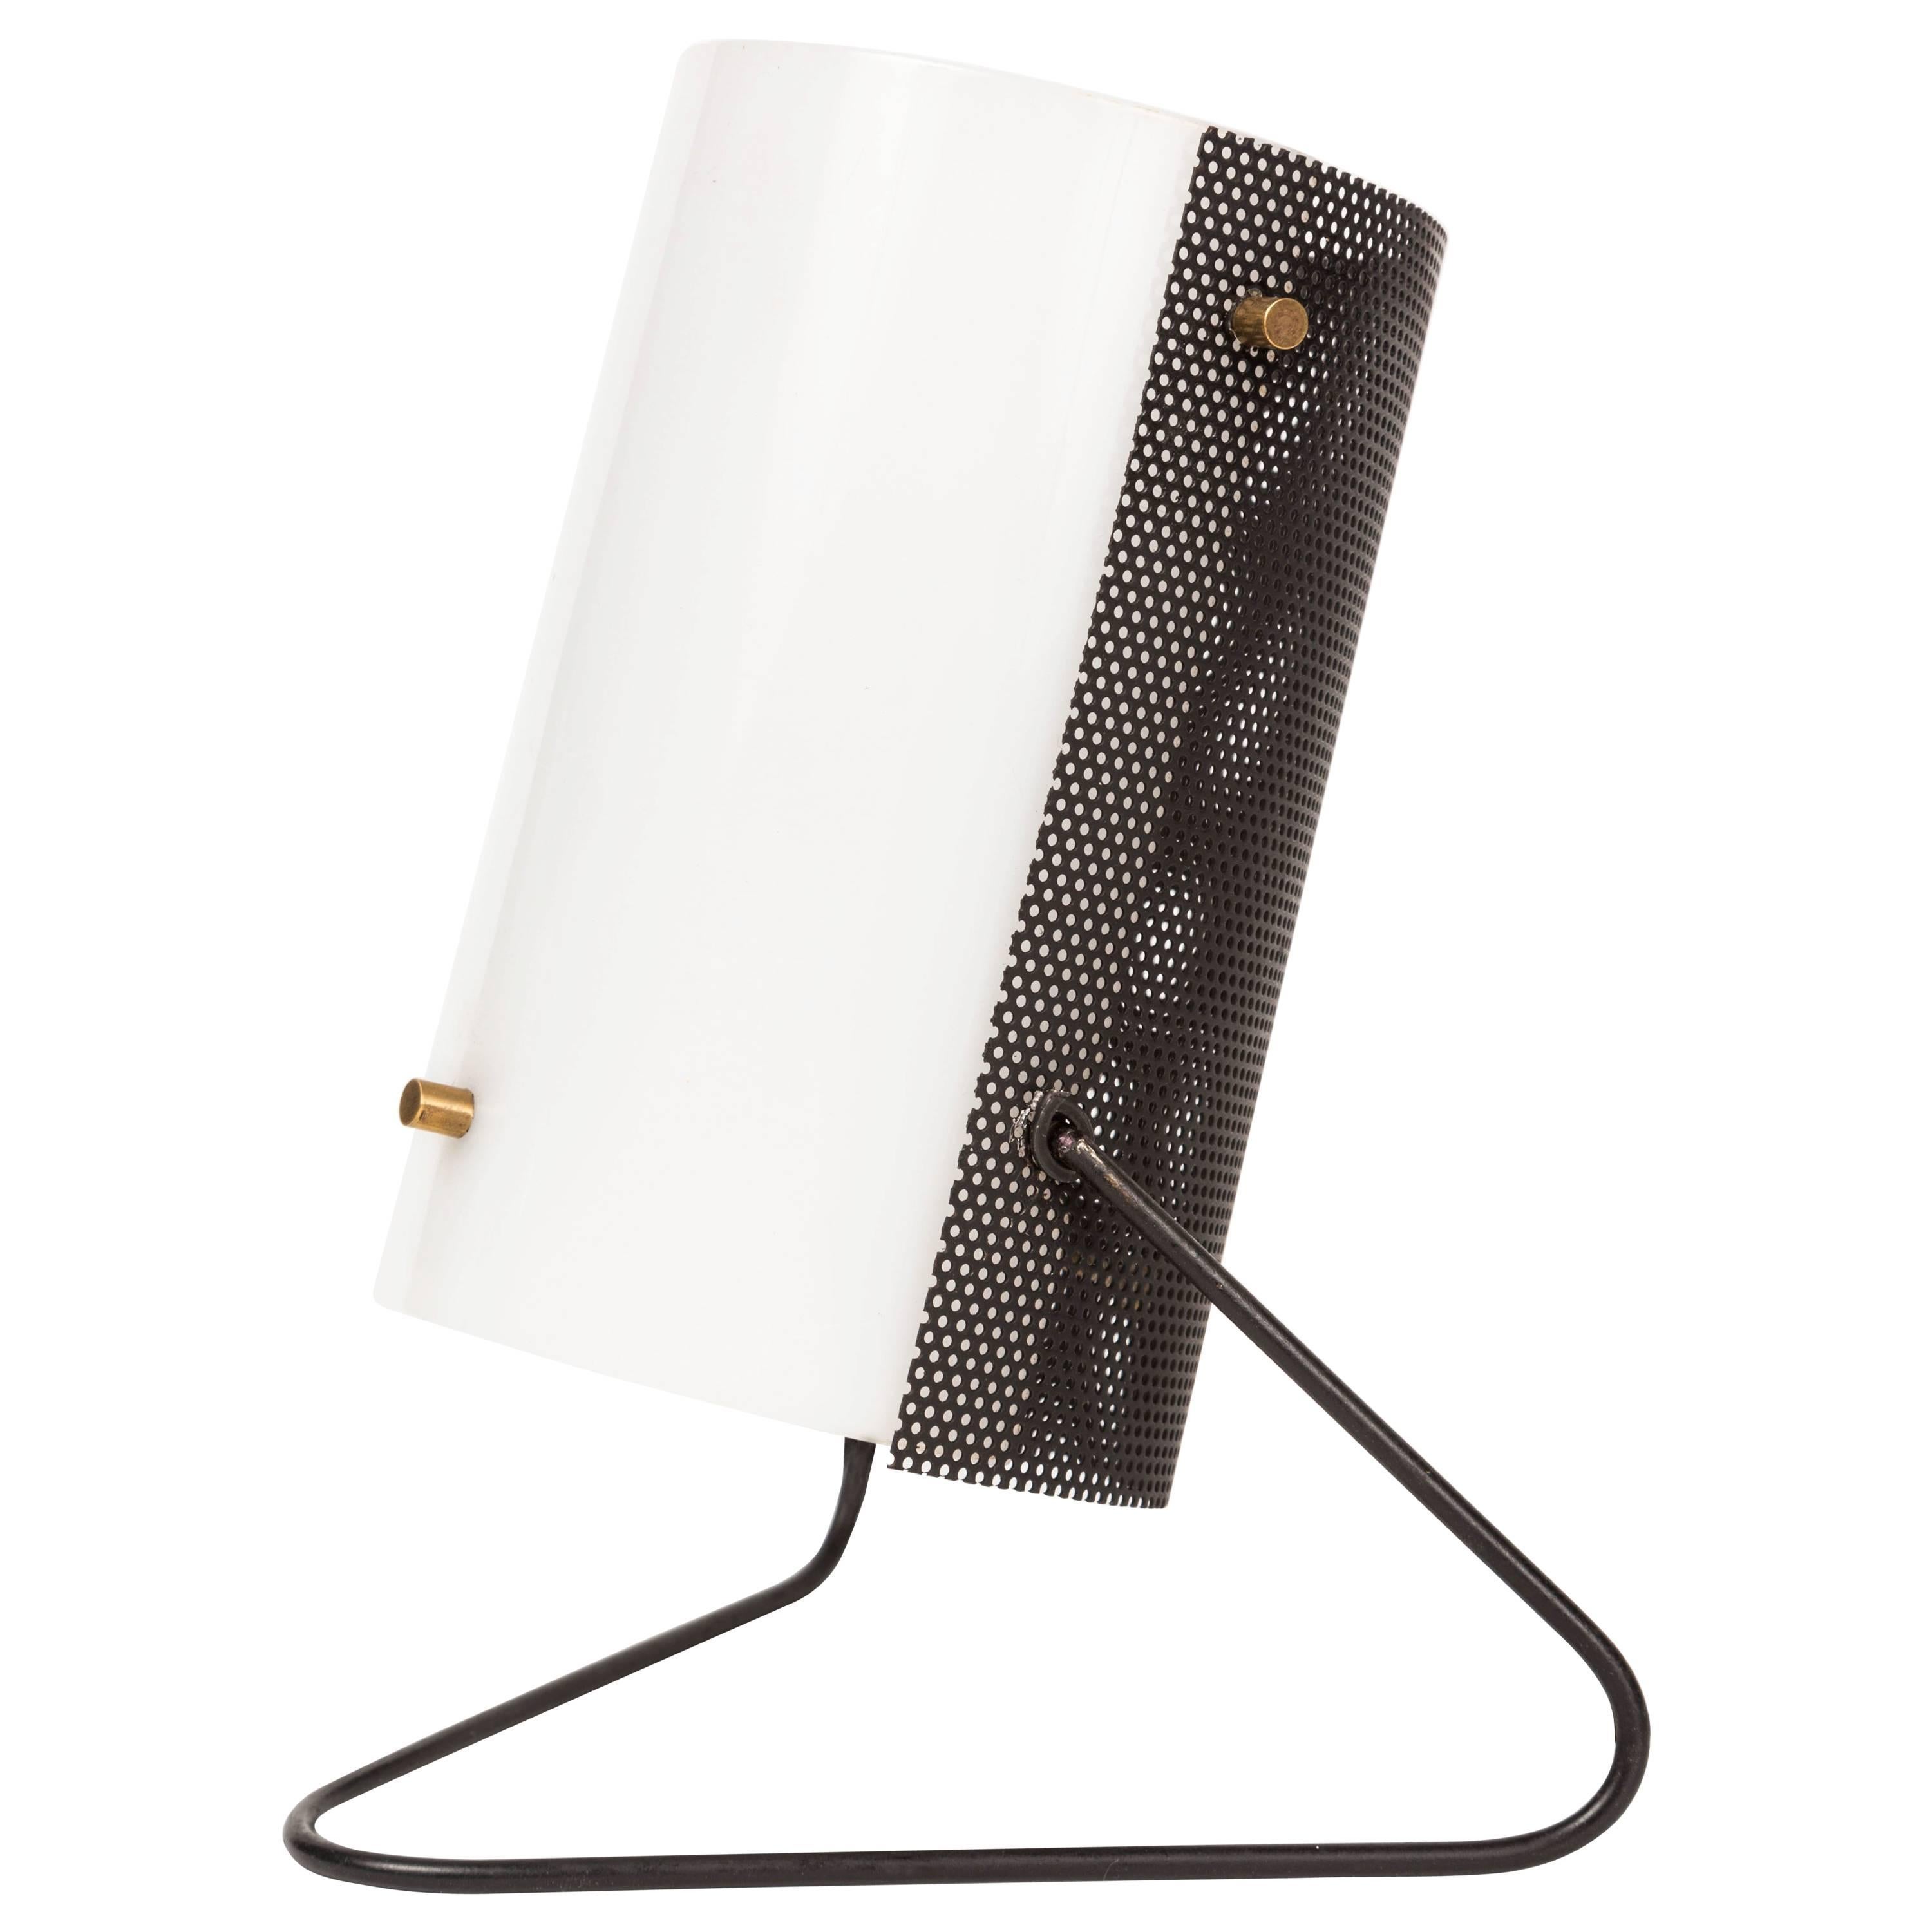 1960s Stilux Milano perforated metal table lamp. This petite and whimsical design echoes those of Mathieu Matégot, but with a quintessentially 1960s Italian twist. Executed in perforated painted metal, clean white Perspex, brass hardware on a